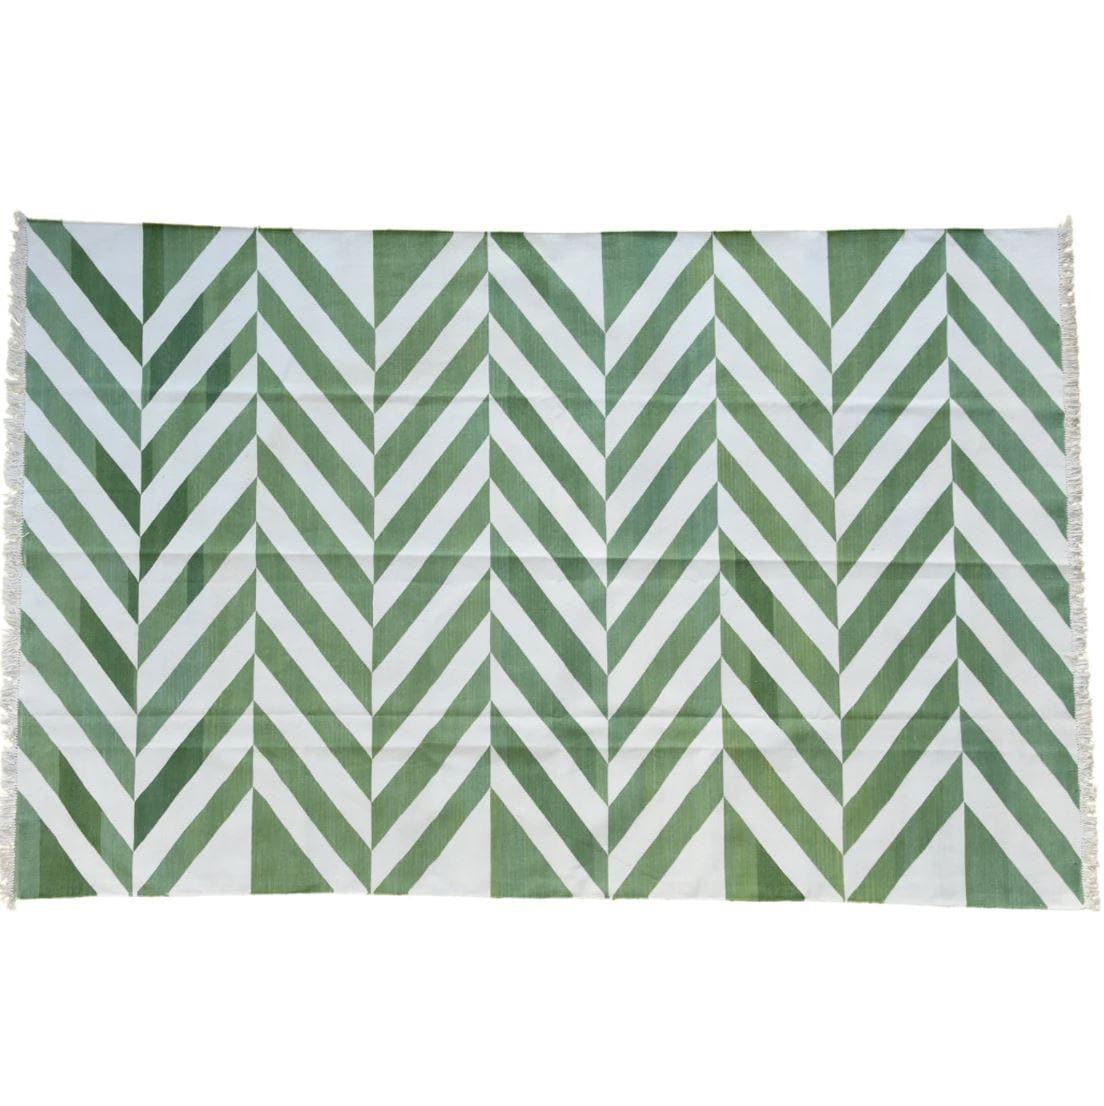 Natural Vegetable Dyed Indian Dhurrie Reversible Cotton Rug - Chevron Green Natural Vegetable Dyed Indian Dhurrie Reversible Cotton Rug - Chevron Green 